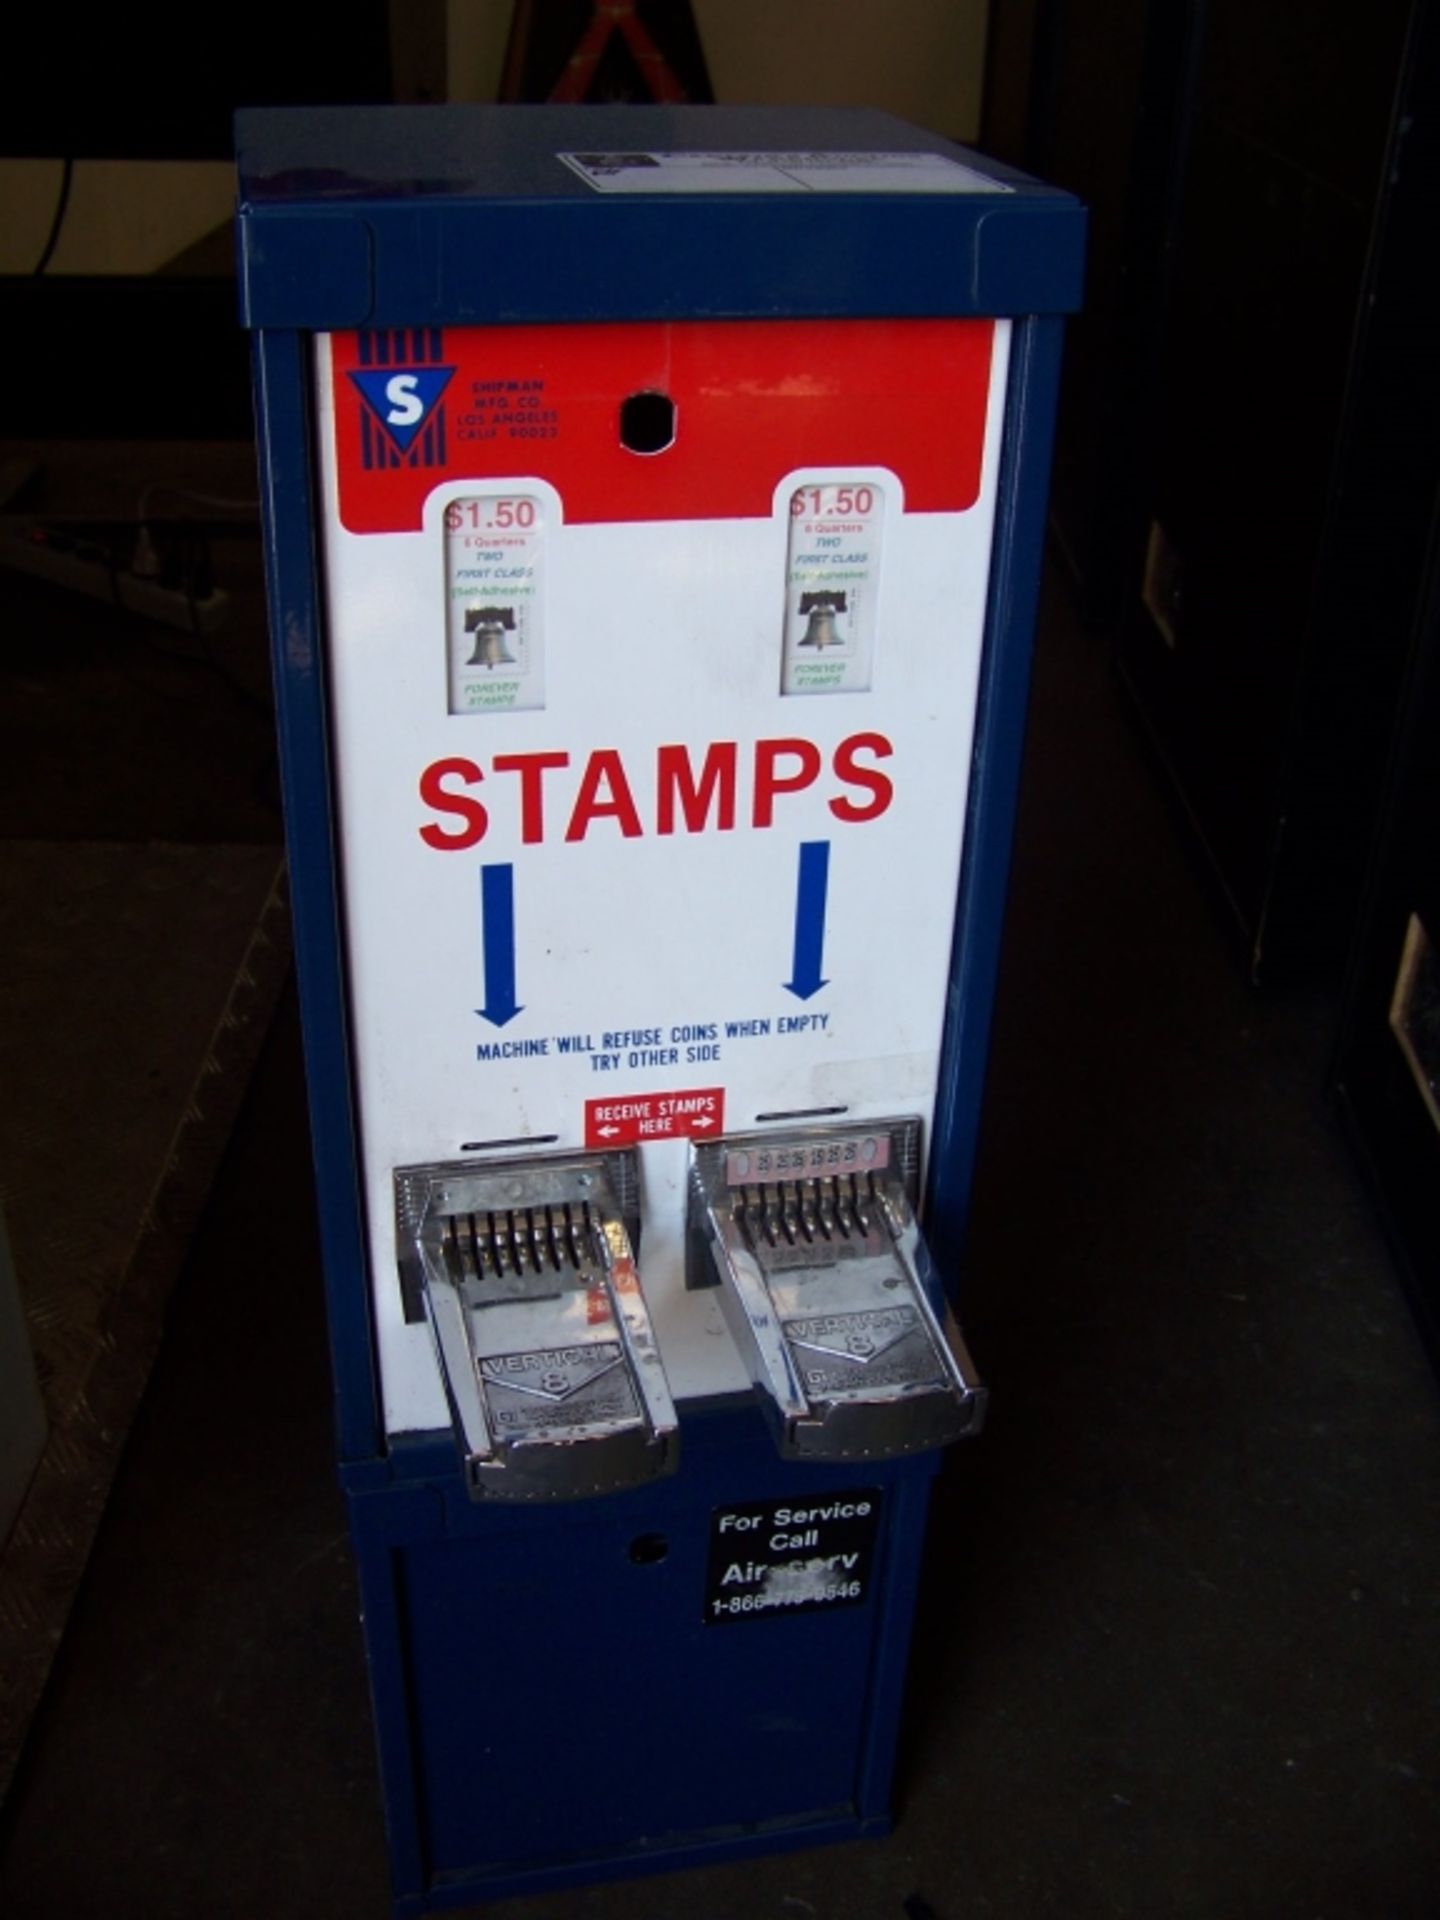 STAMP VENDING MACHINE U.S. POSTAGE Item is in used condition. Evidence of wear and commercial